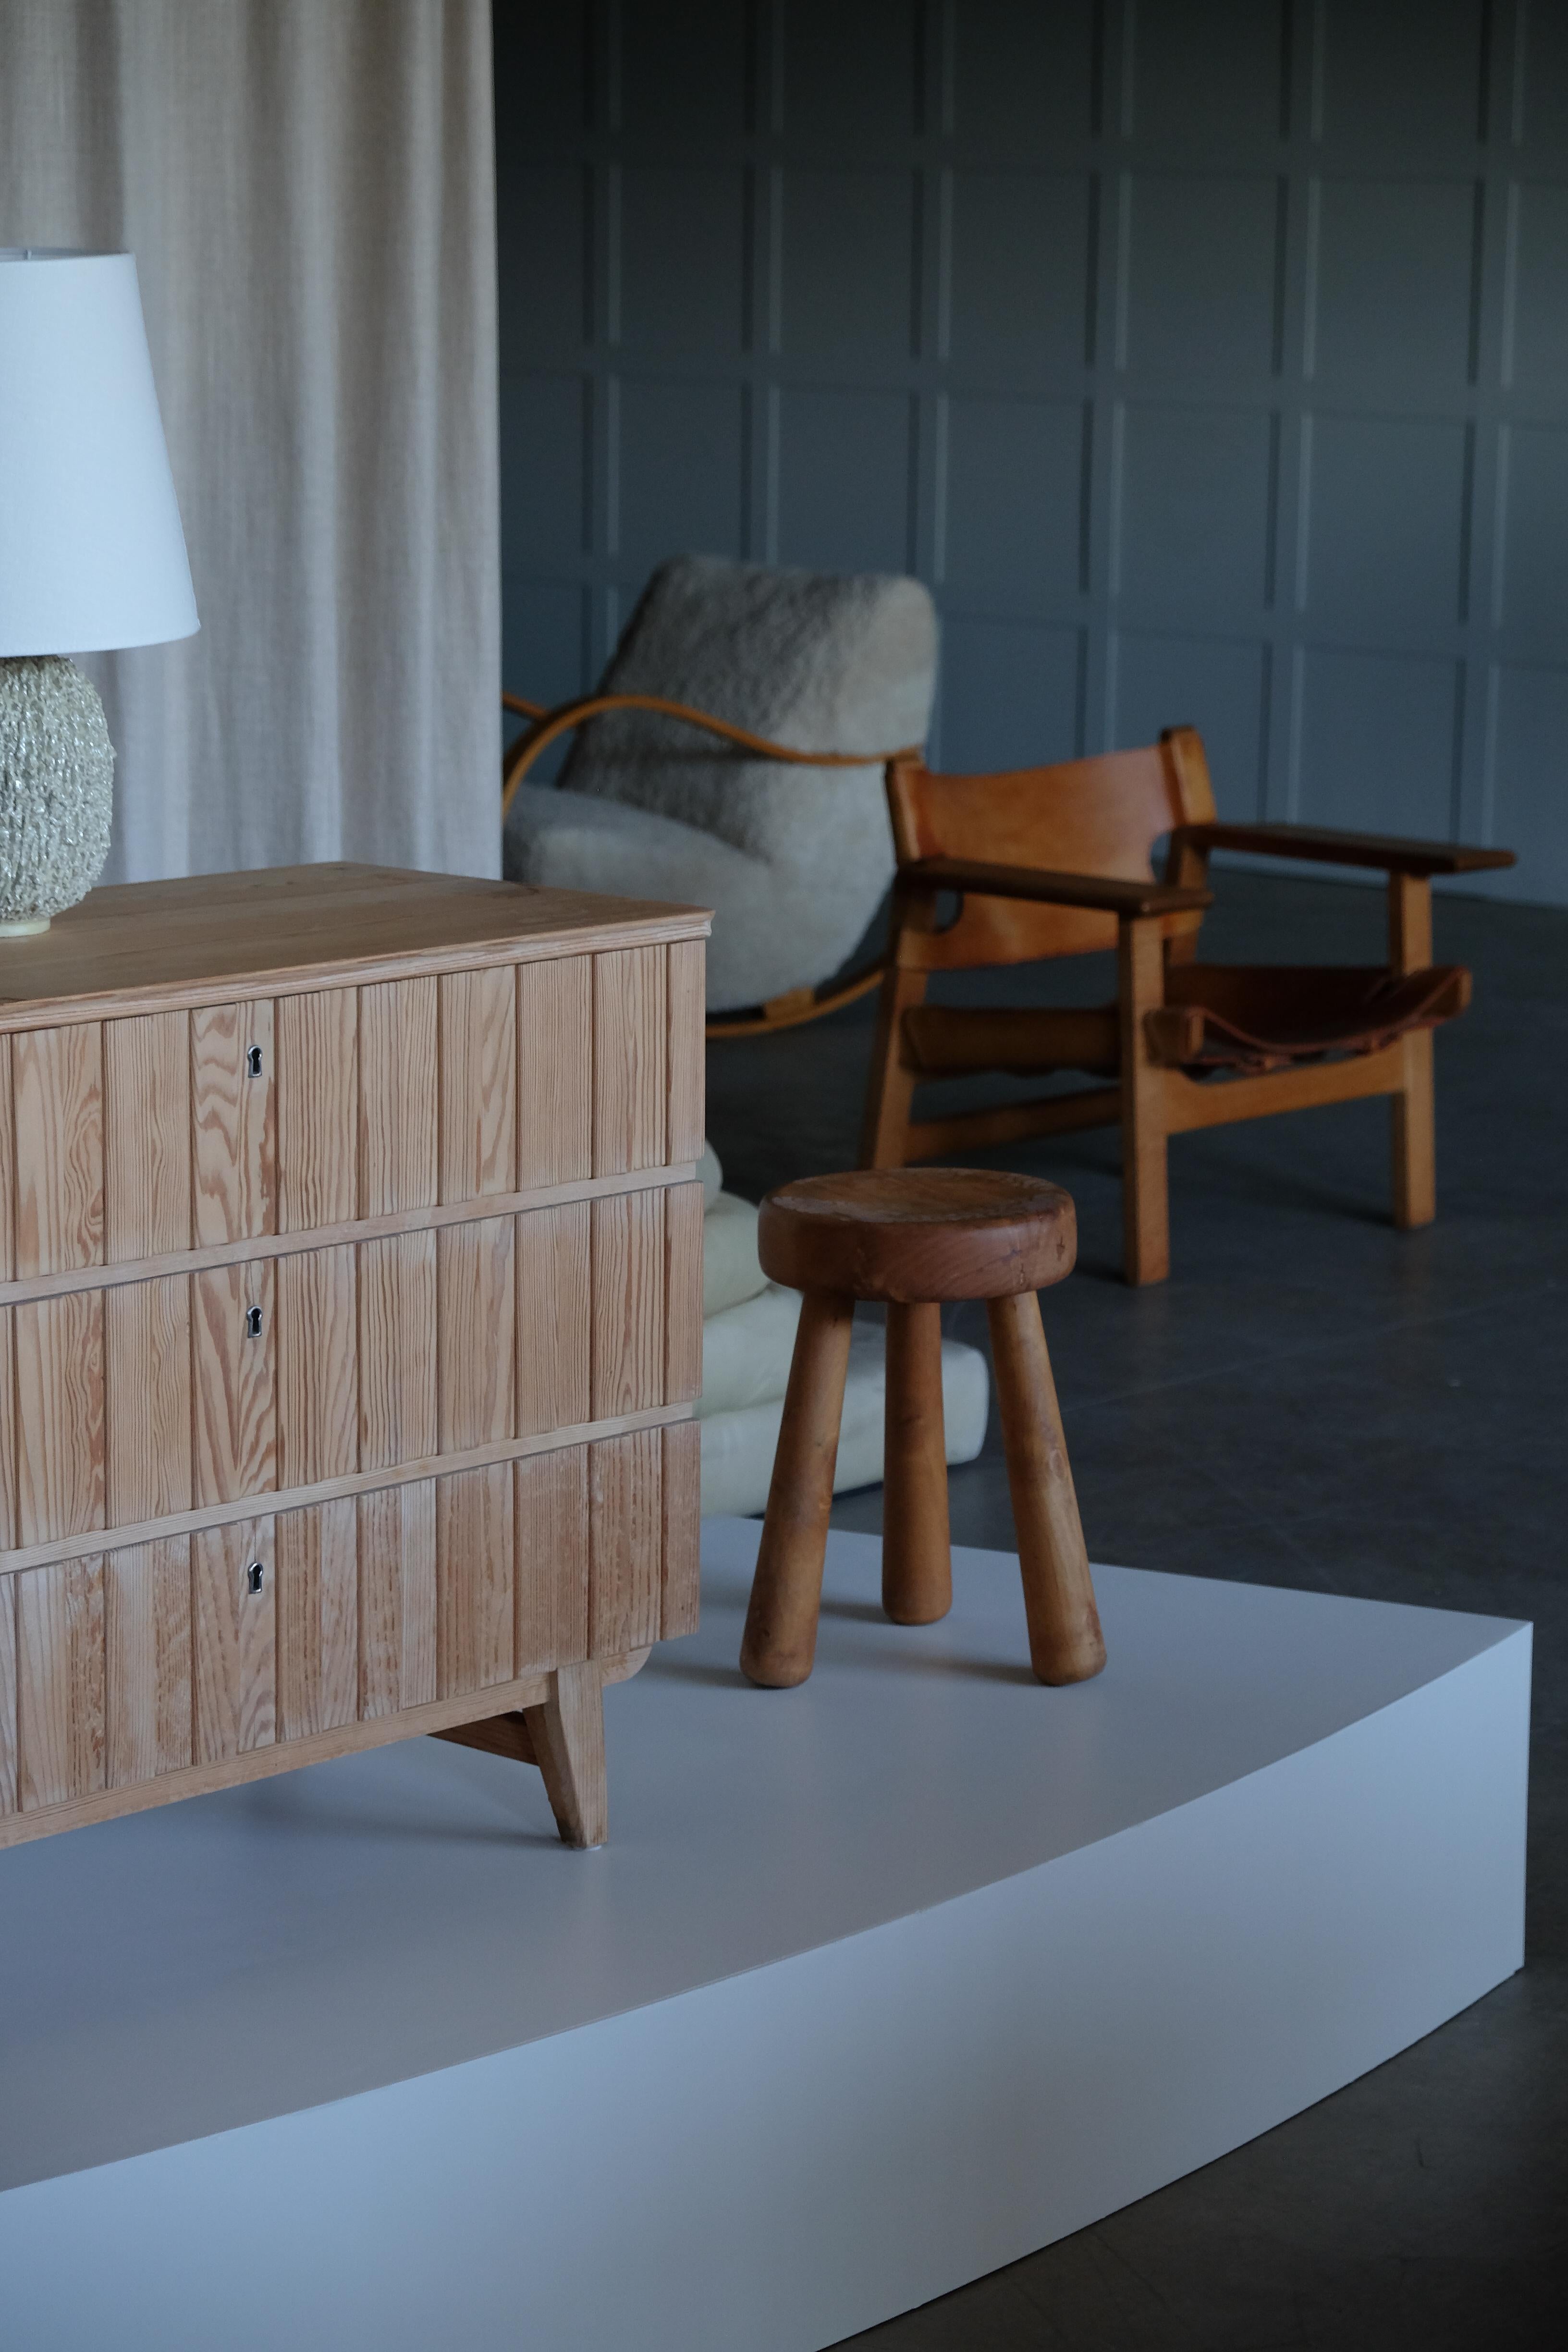 Bureau / chest of drawers in pine designed by Göran Malmvall, produced in Sweden by Svensk Fur, 1960s.
Global front door shipping available.